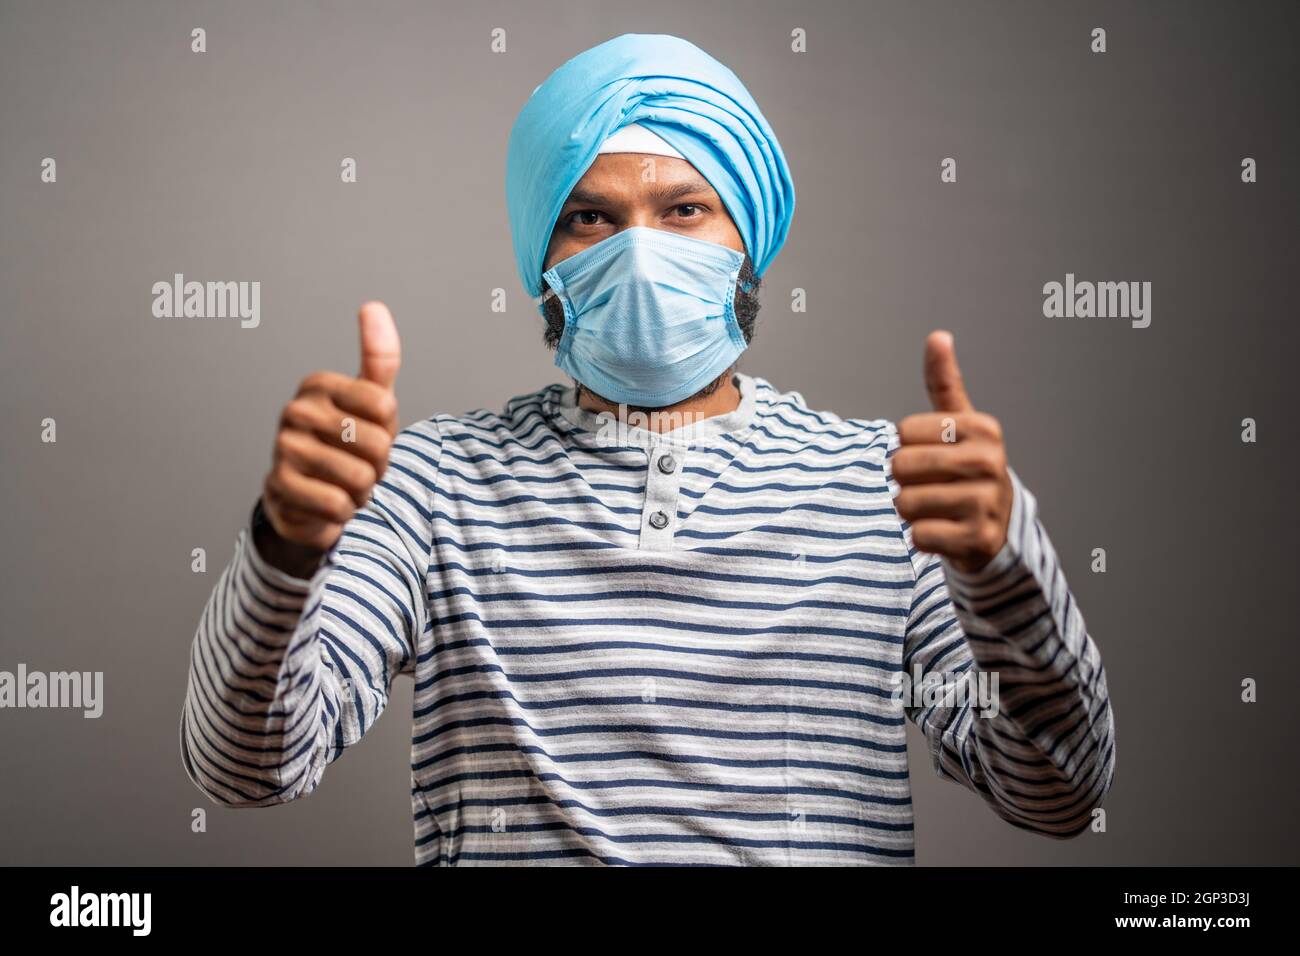 Young sikh man with medical face mask recommending to wear face mask by showing thumbs up gesture during coronavirus covid-19 pandemic. Stock Photo